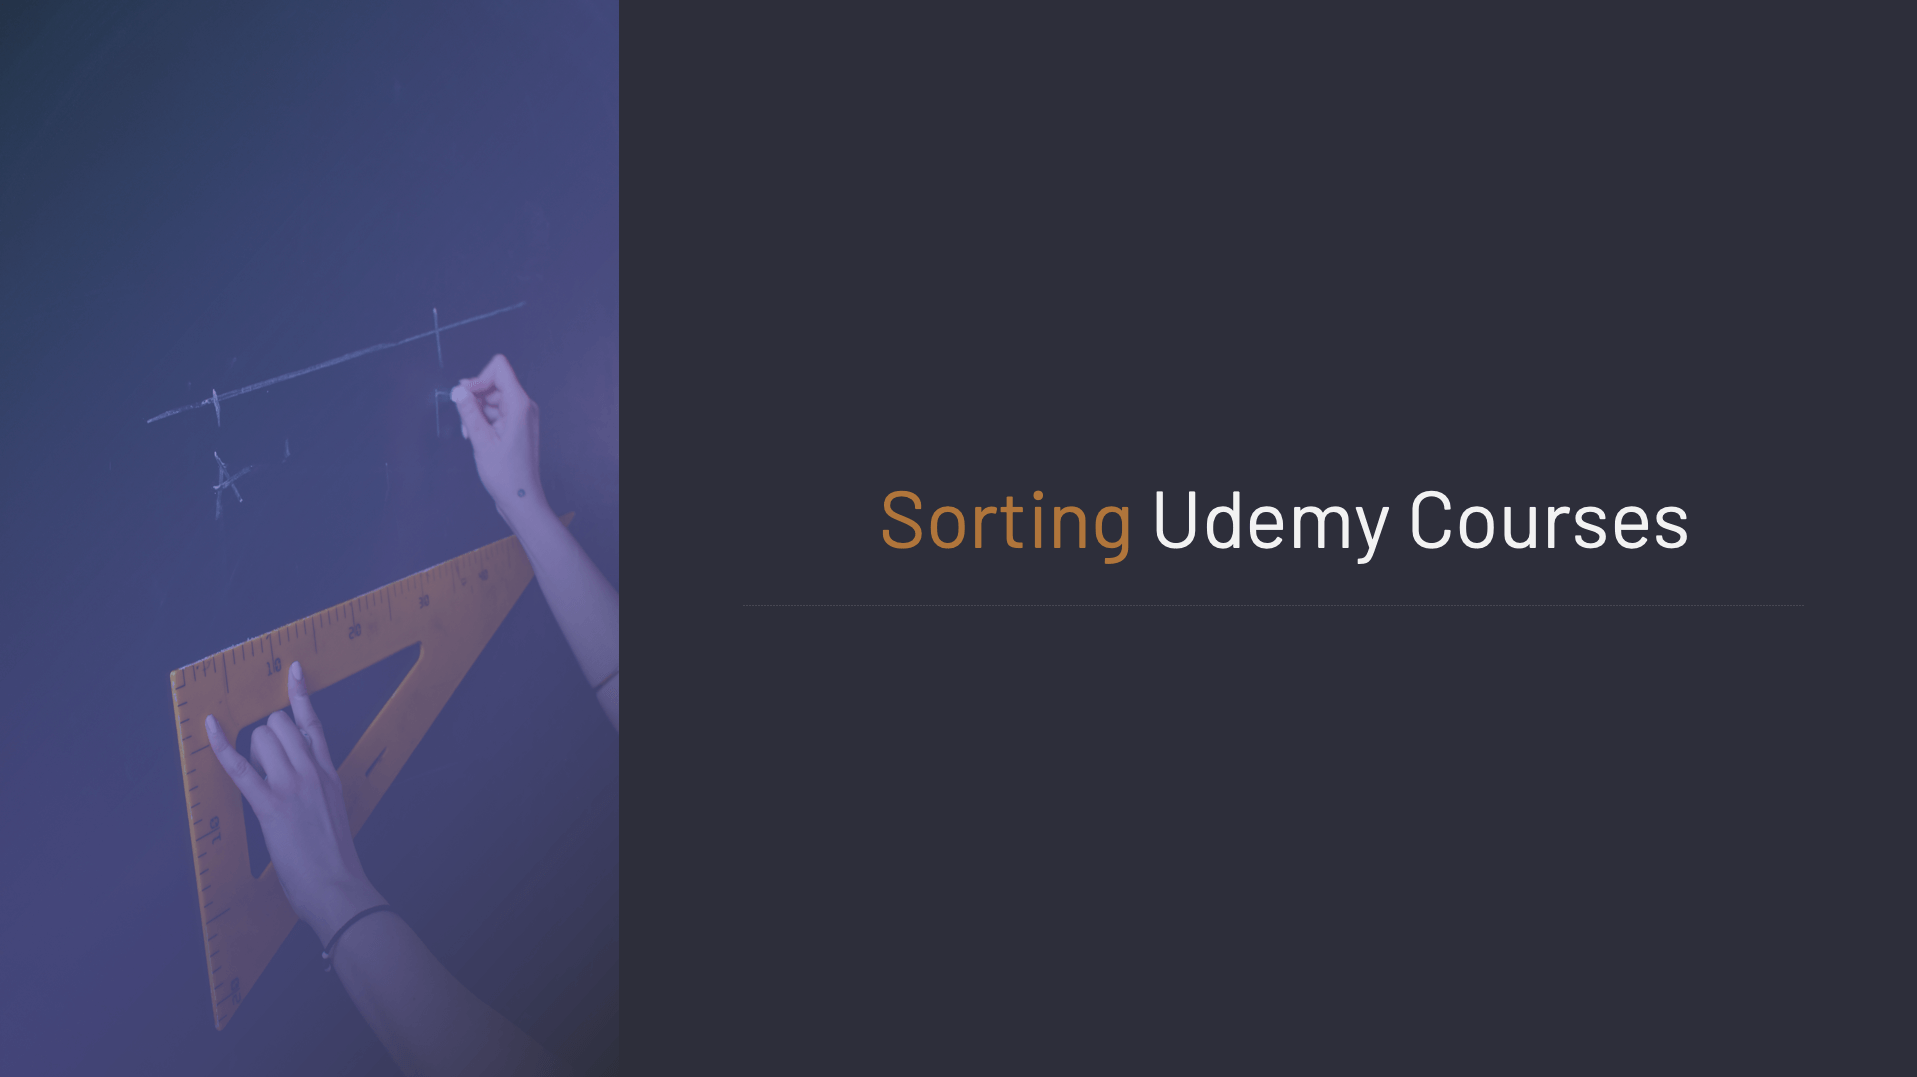 Sorting Udemy Courses